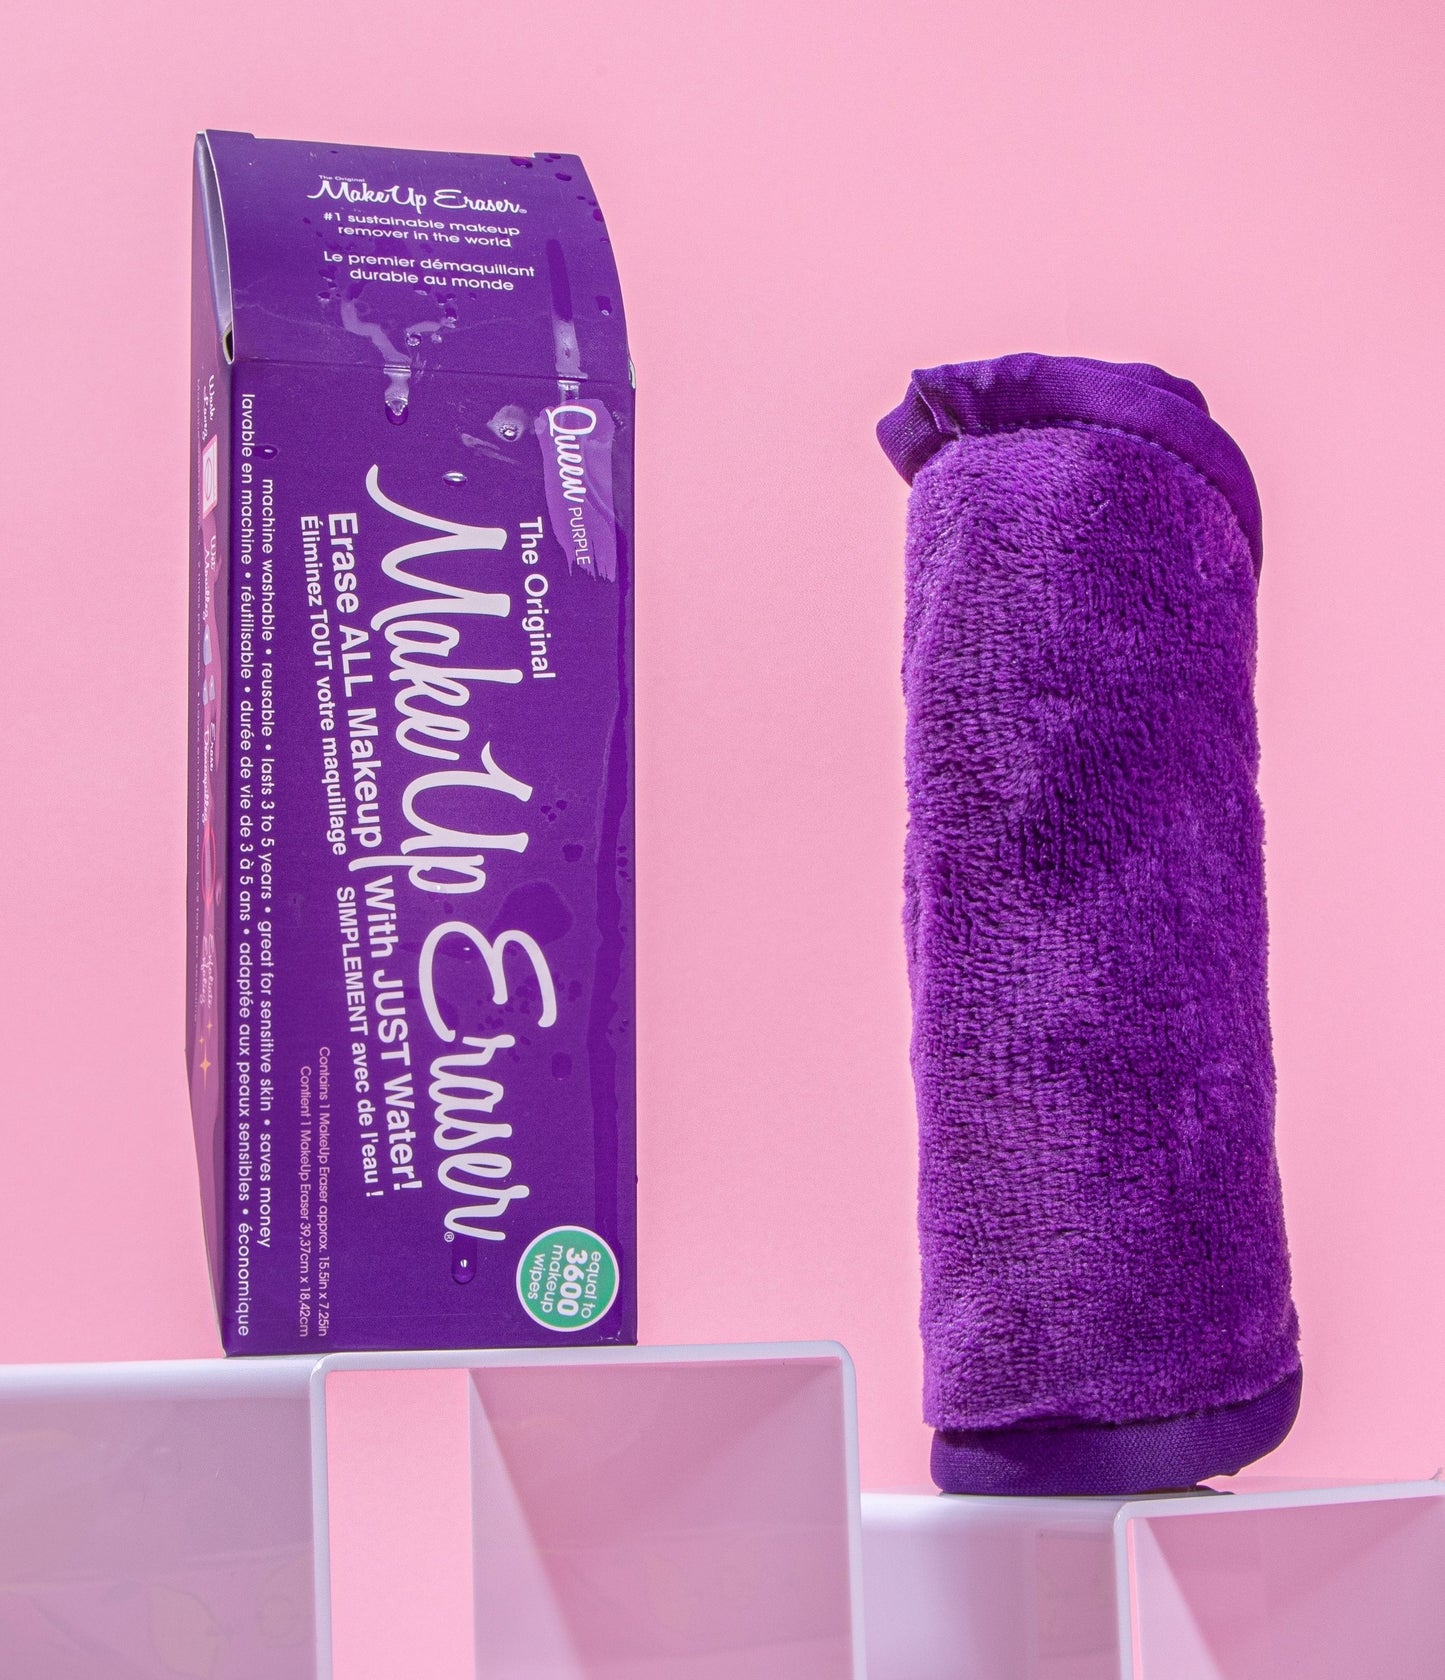 Rolled up Queen Purple MakeUp Eraser next to packaging, both propped up on platforms.